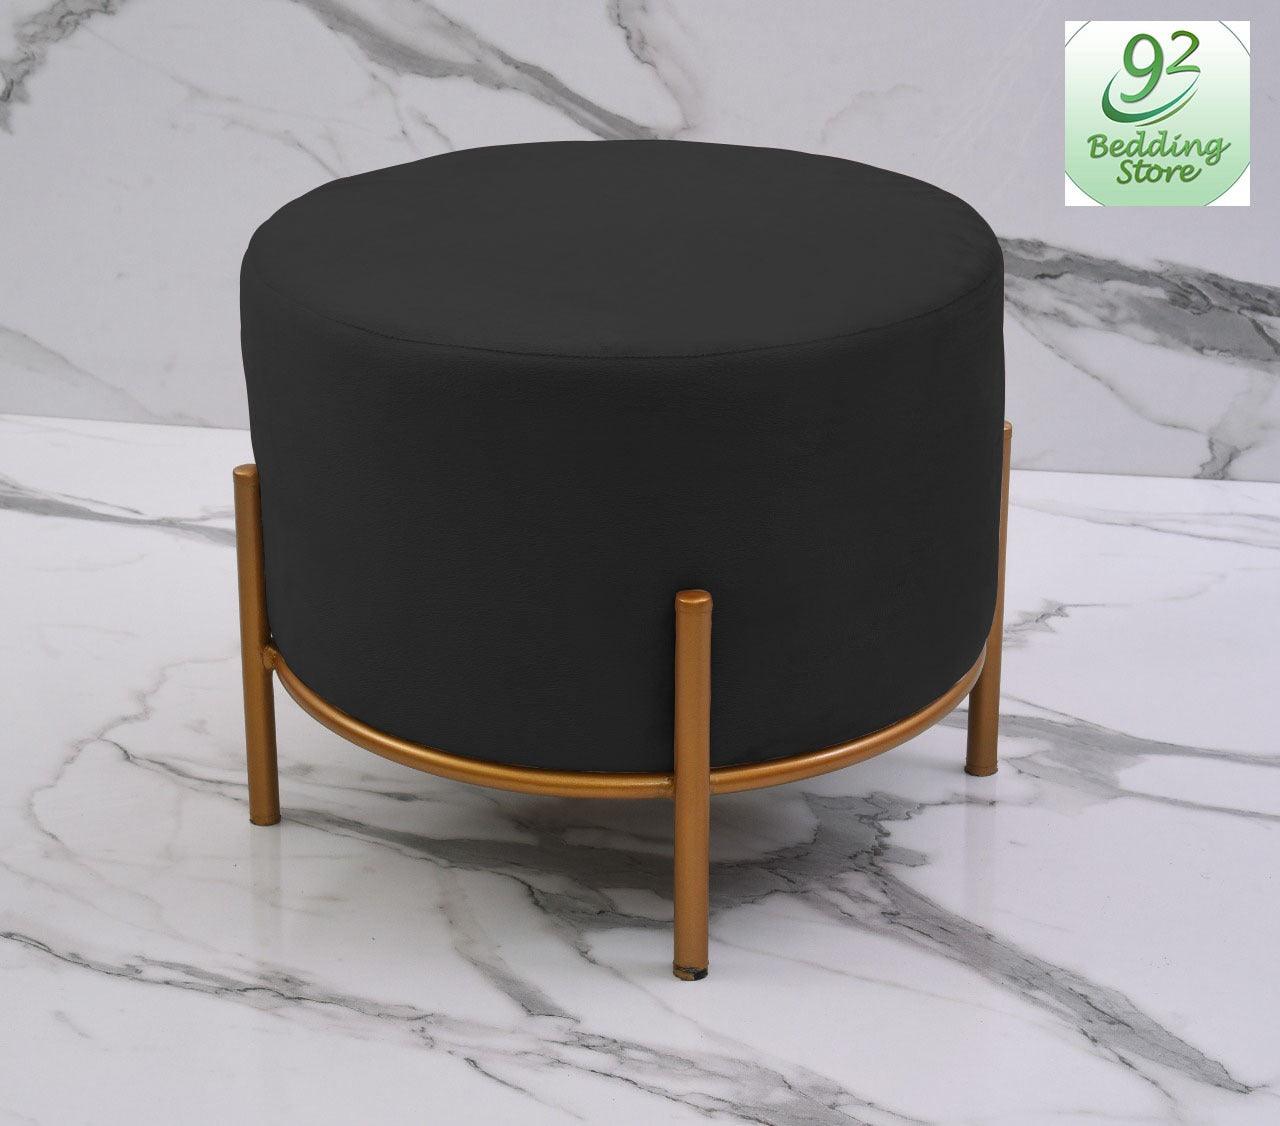 Drone Shape Wooden Stool With Steel Frame -1050 - 92Bedding